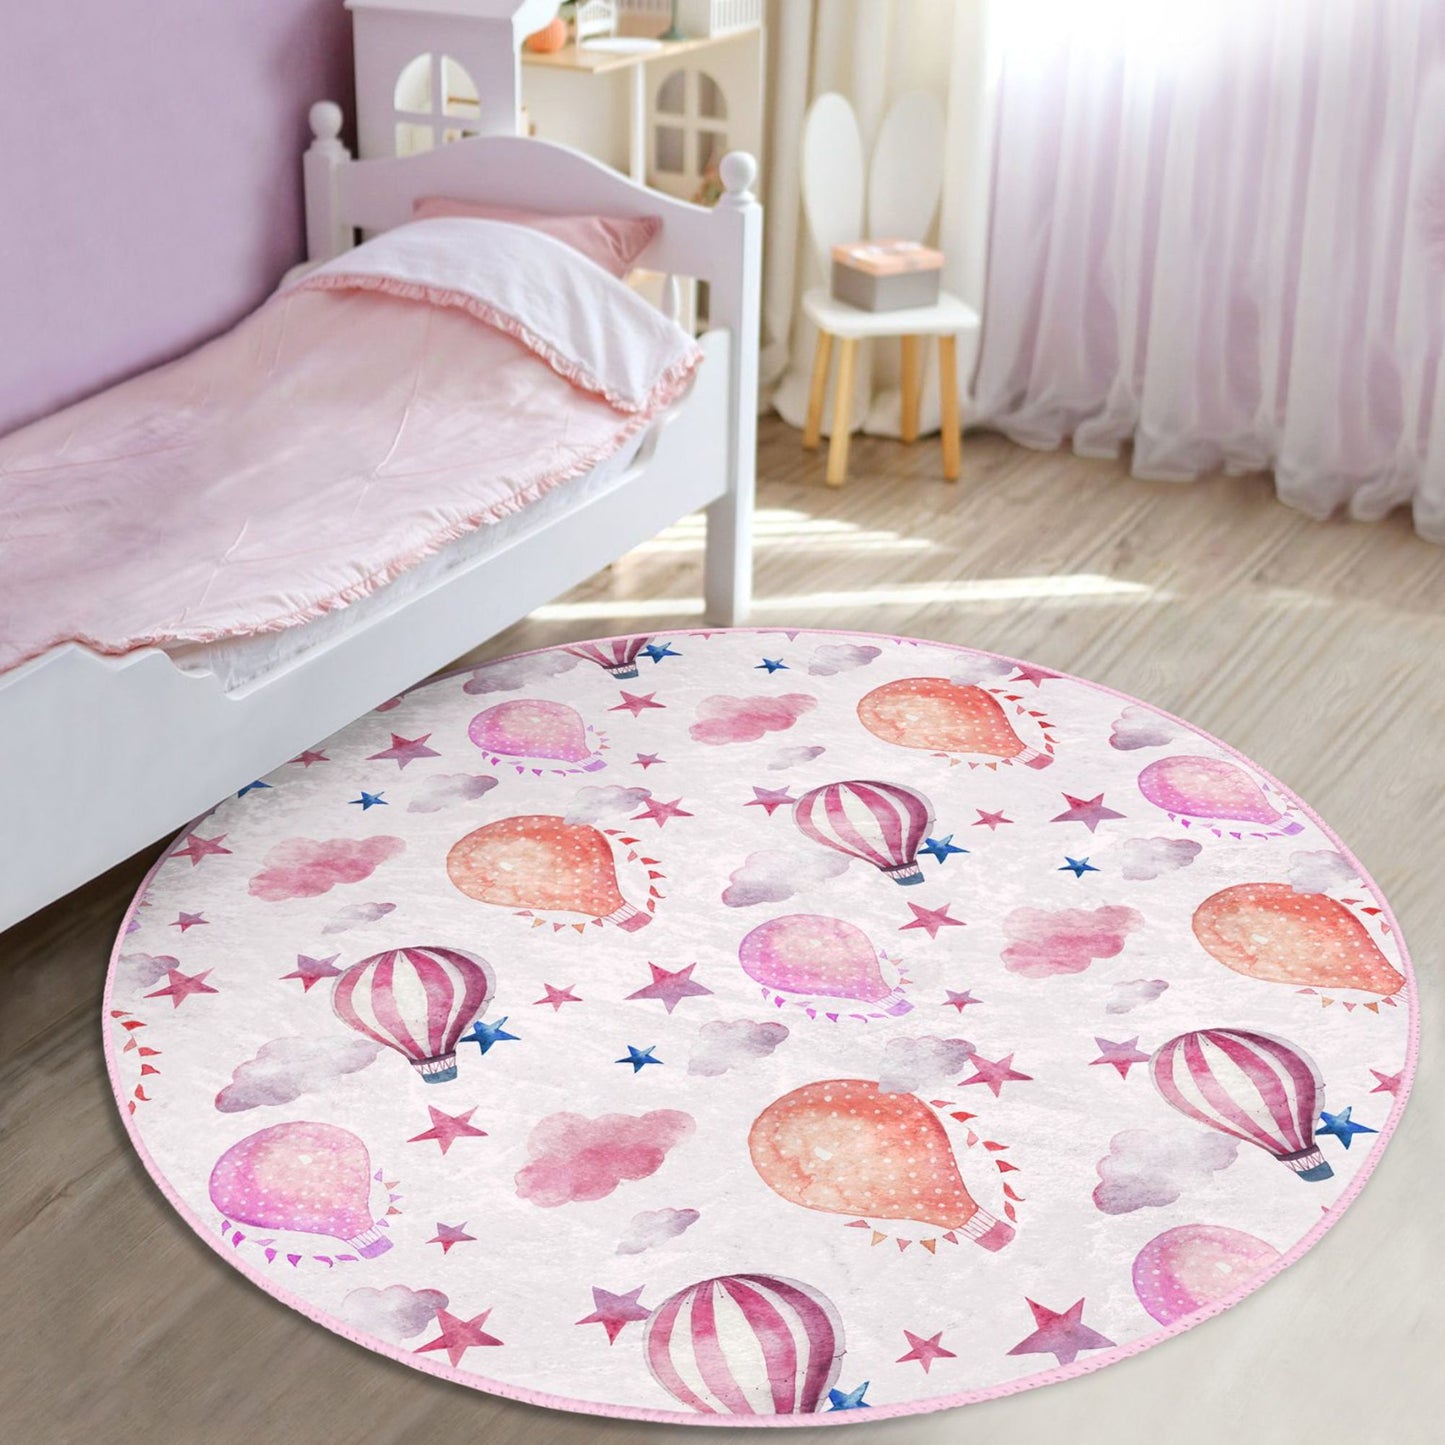 Cheerful Pink Balloons Design Rug for Kids